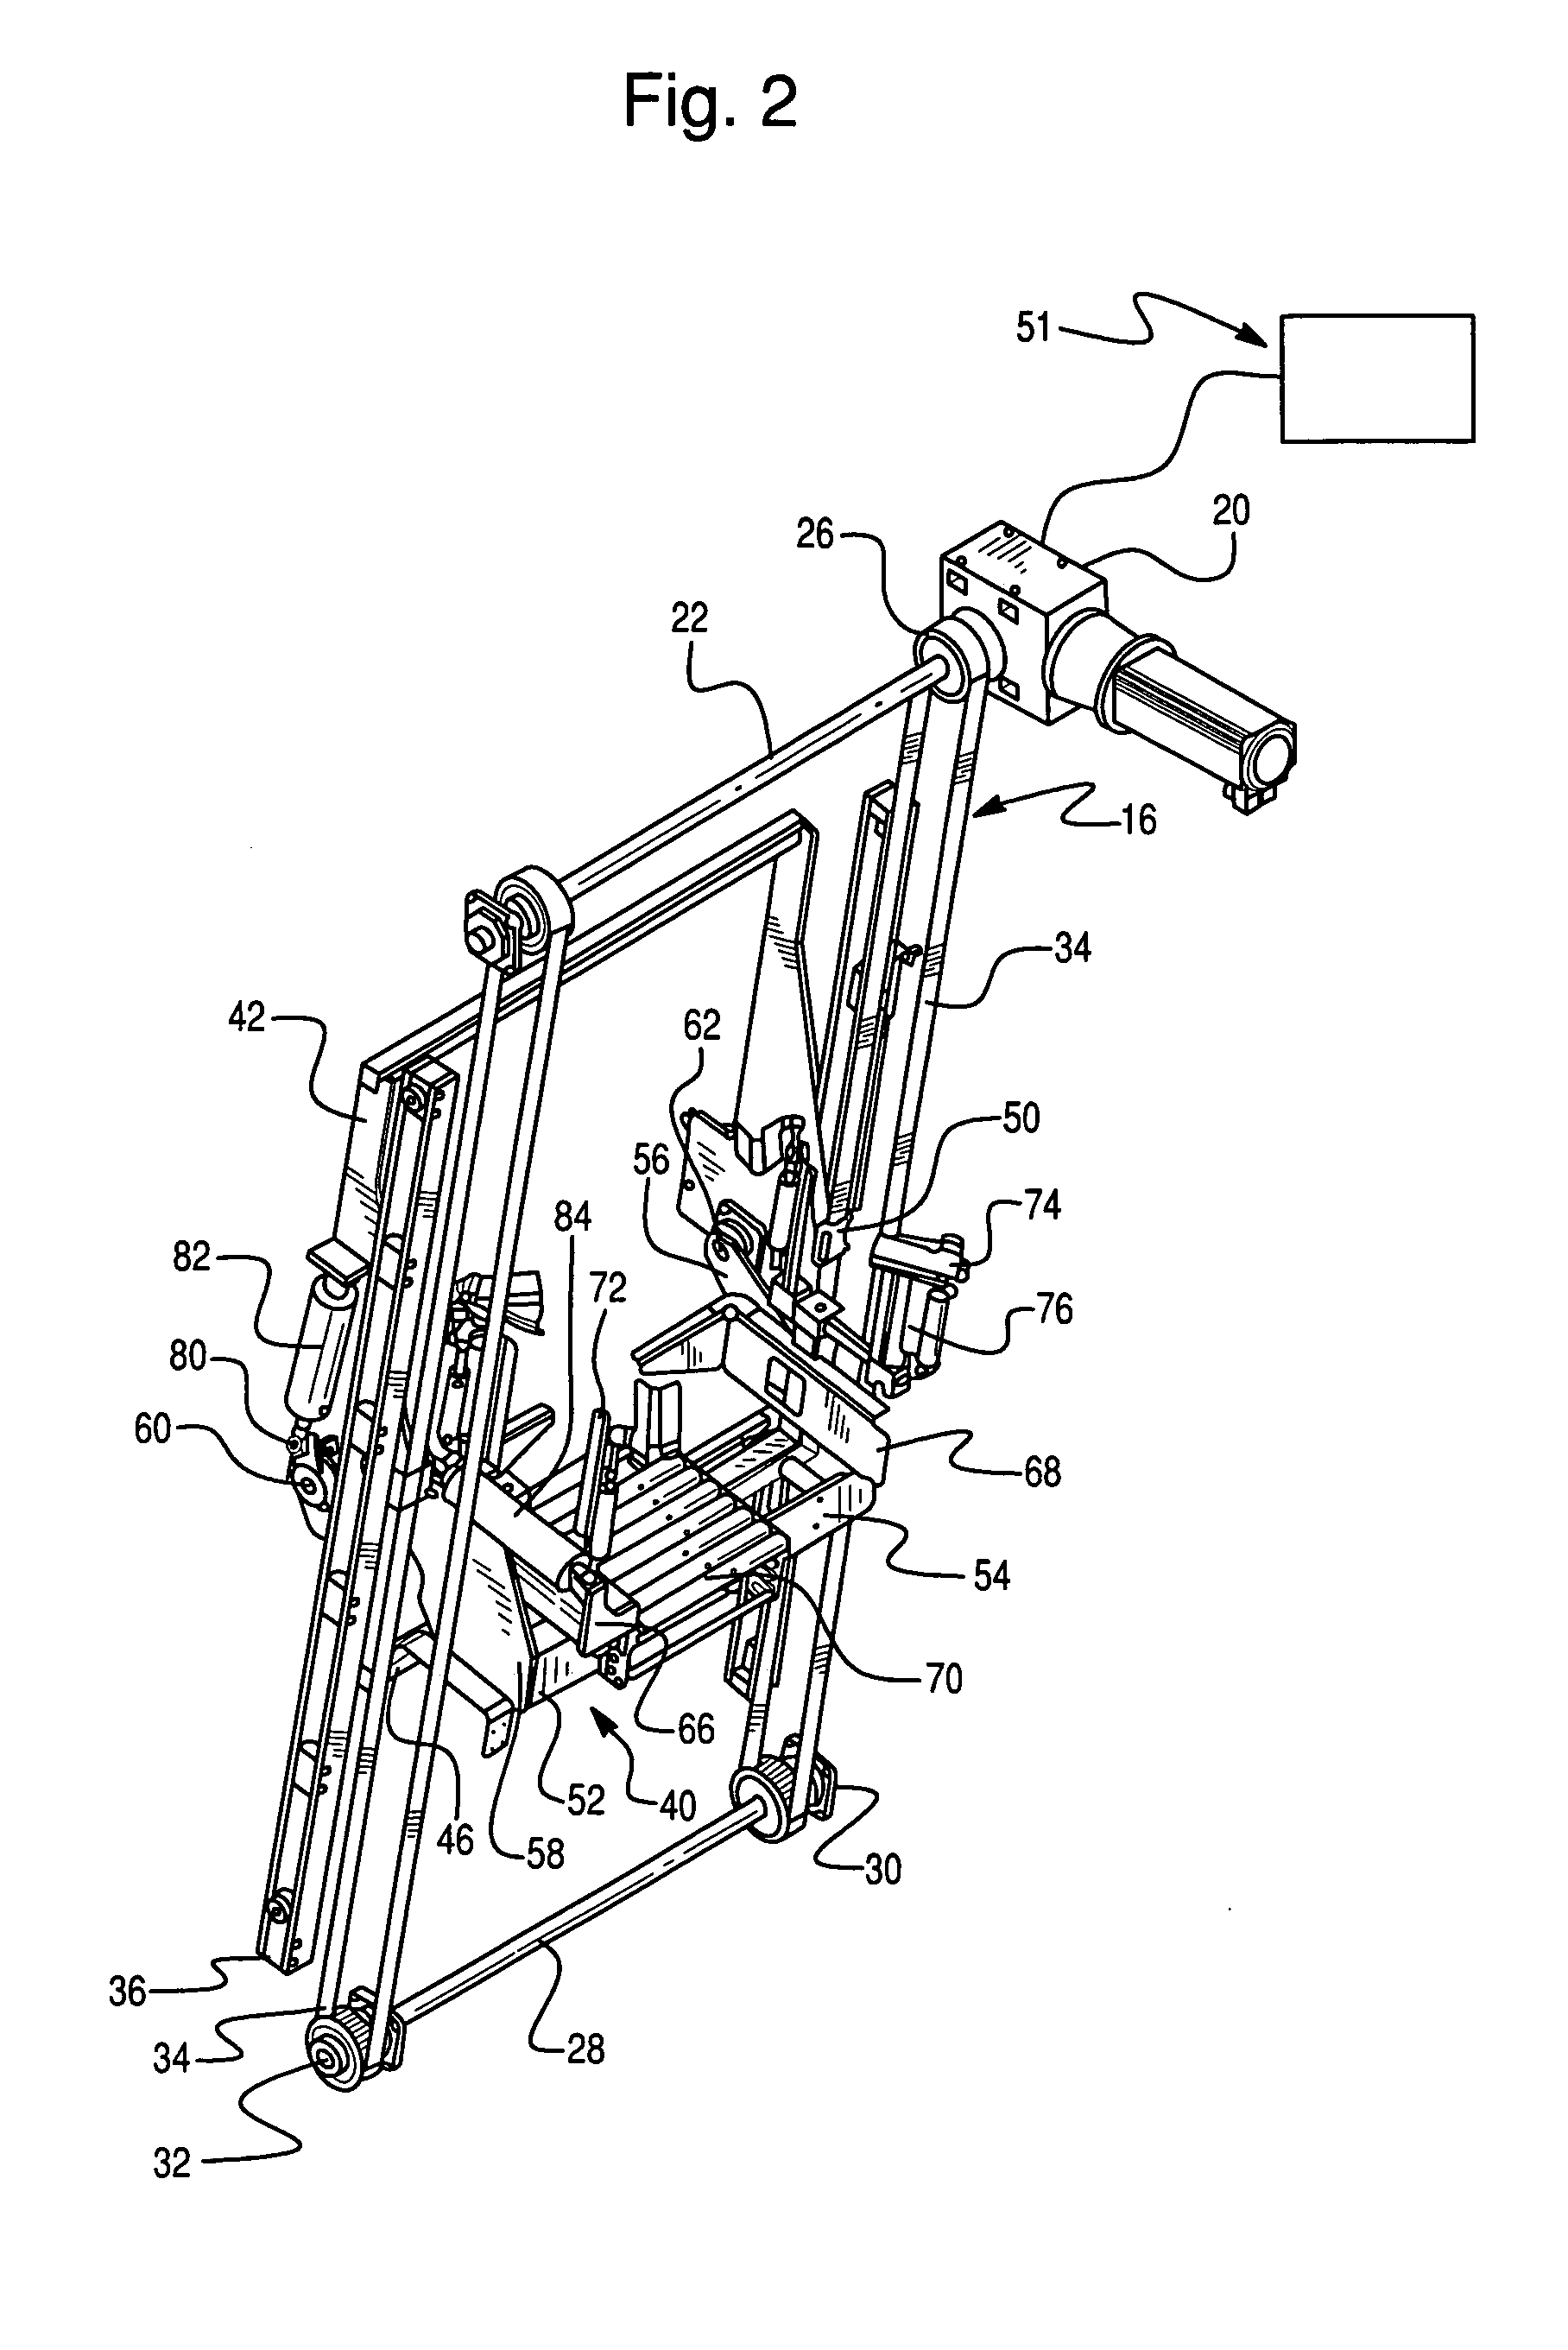 Apparatus for packing